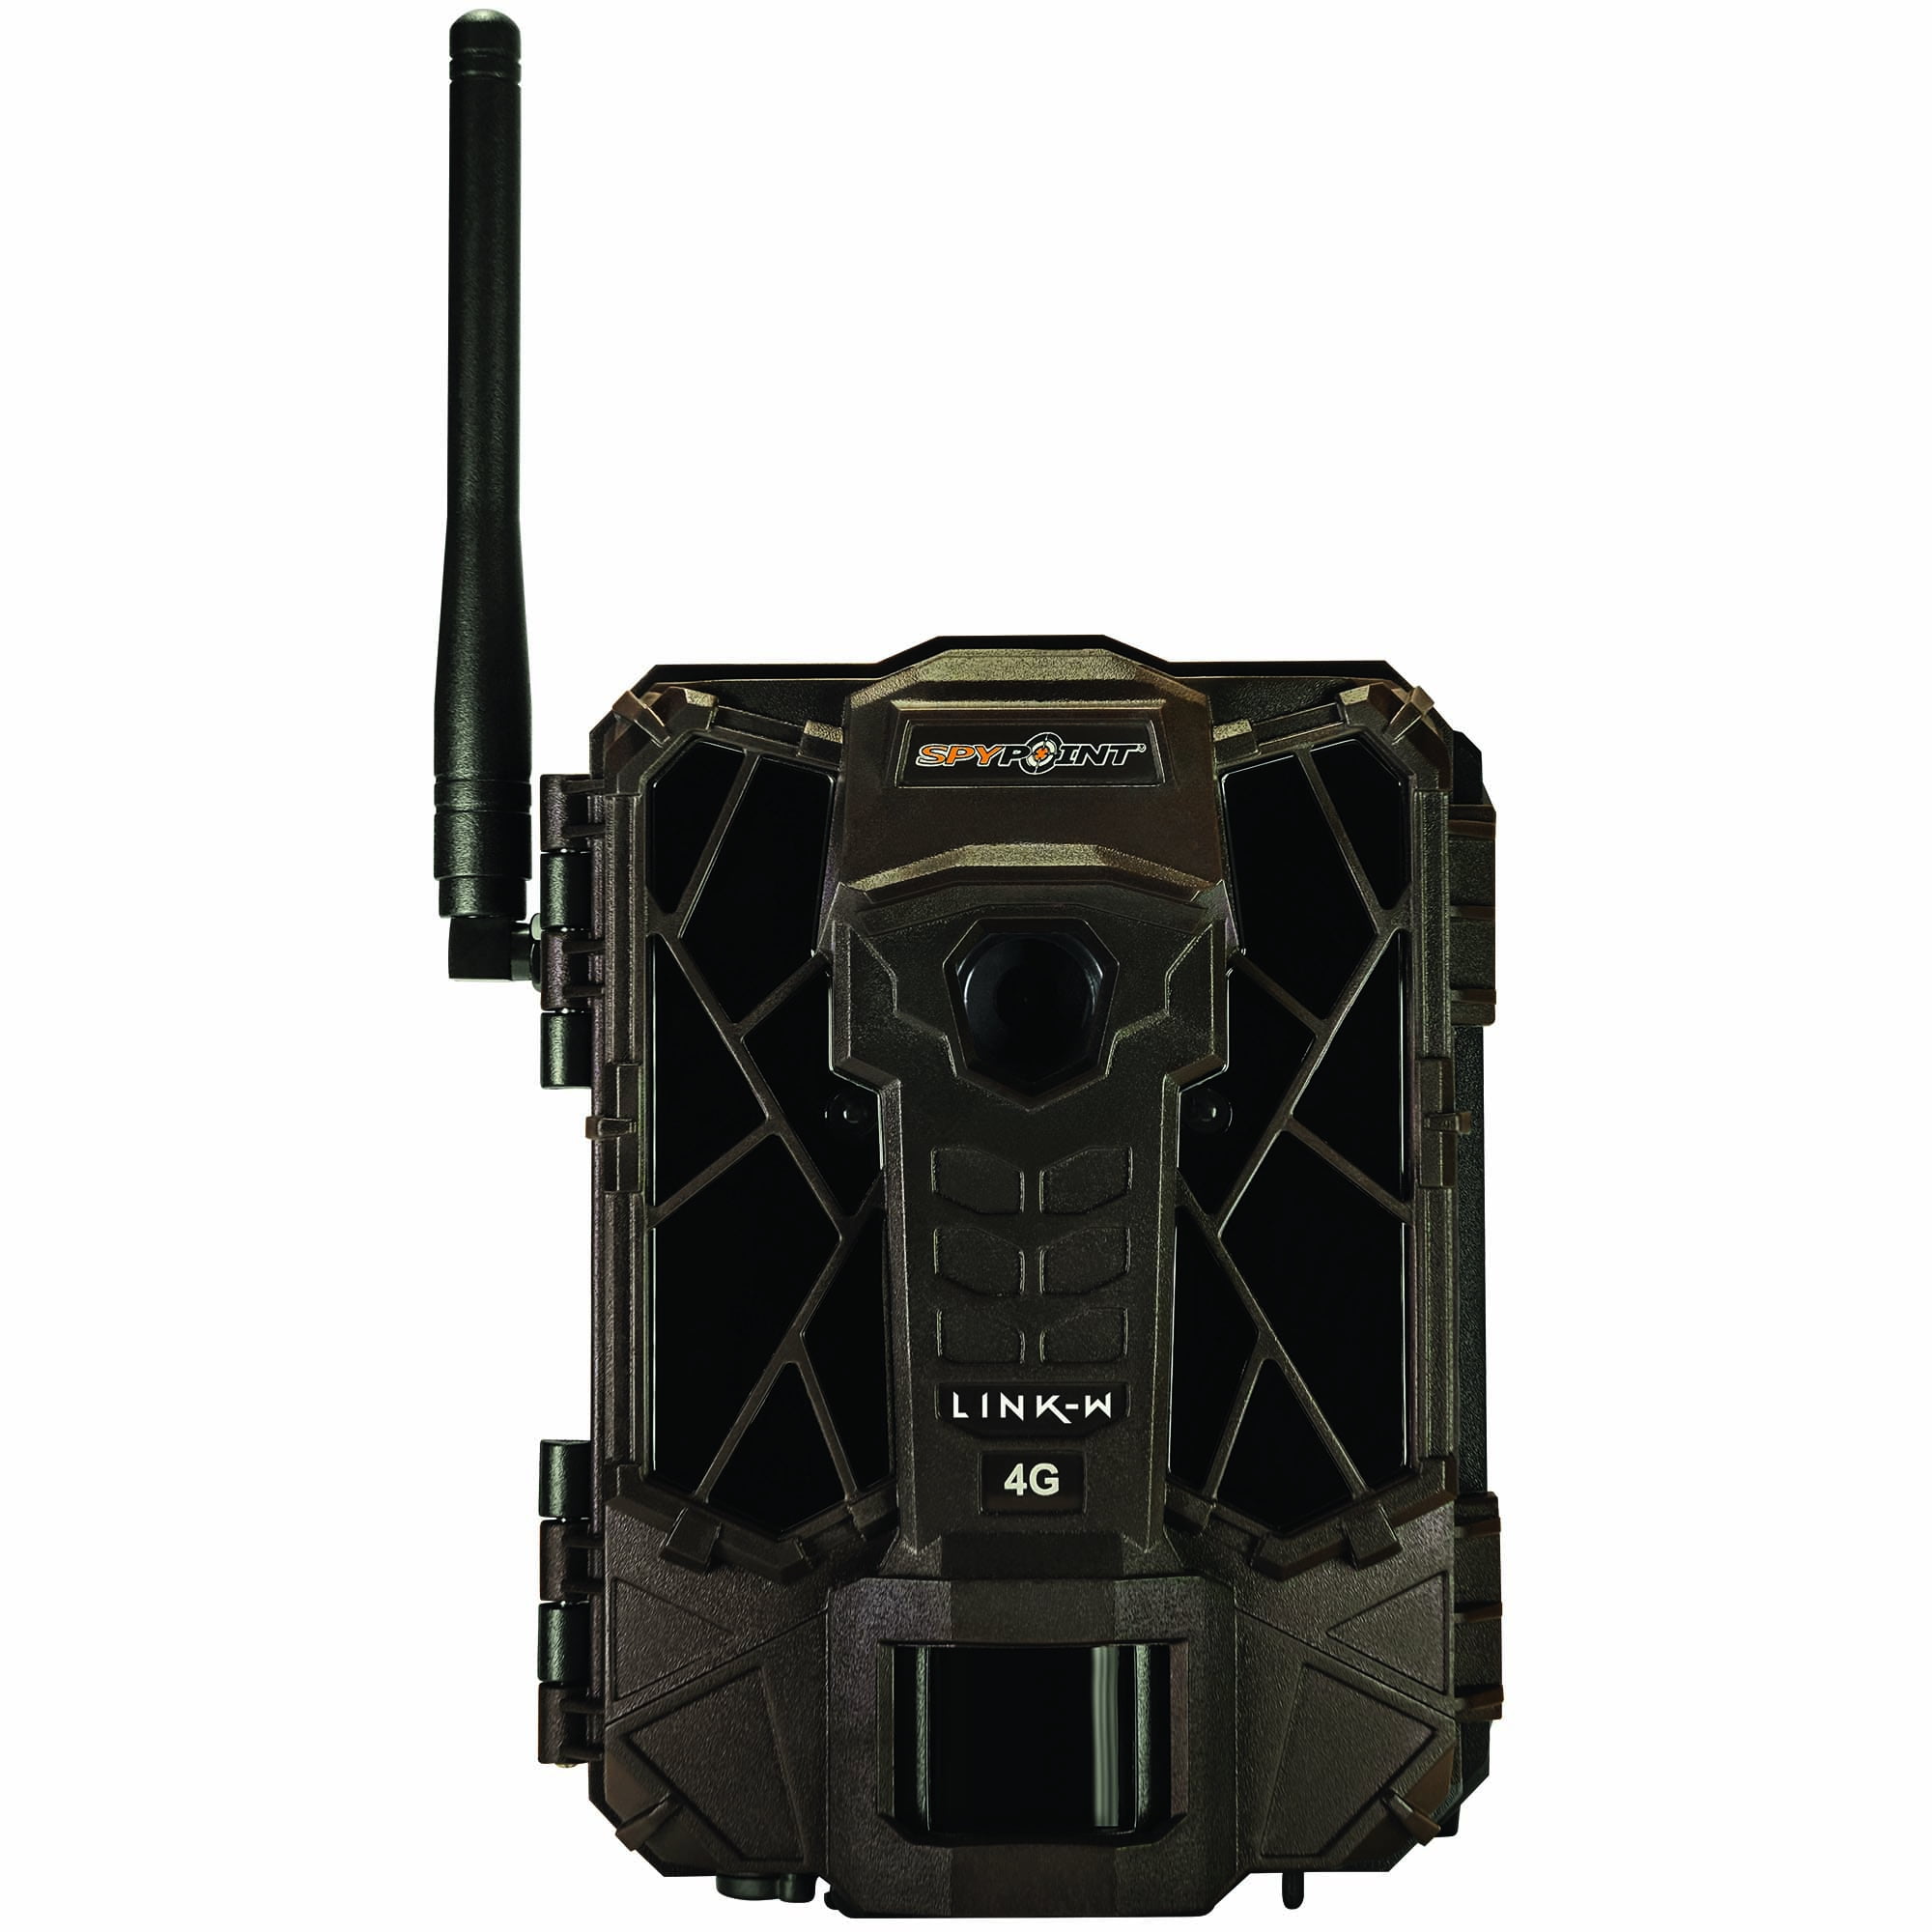 SPYPOINT LINK-W 4G Trail Camera for sale online 